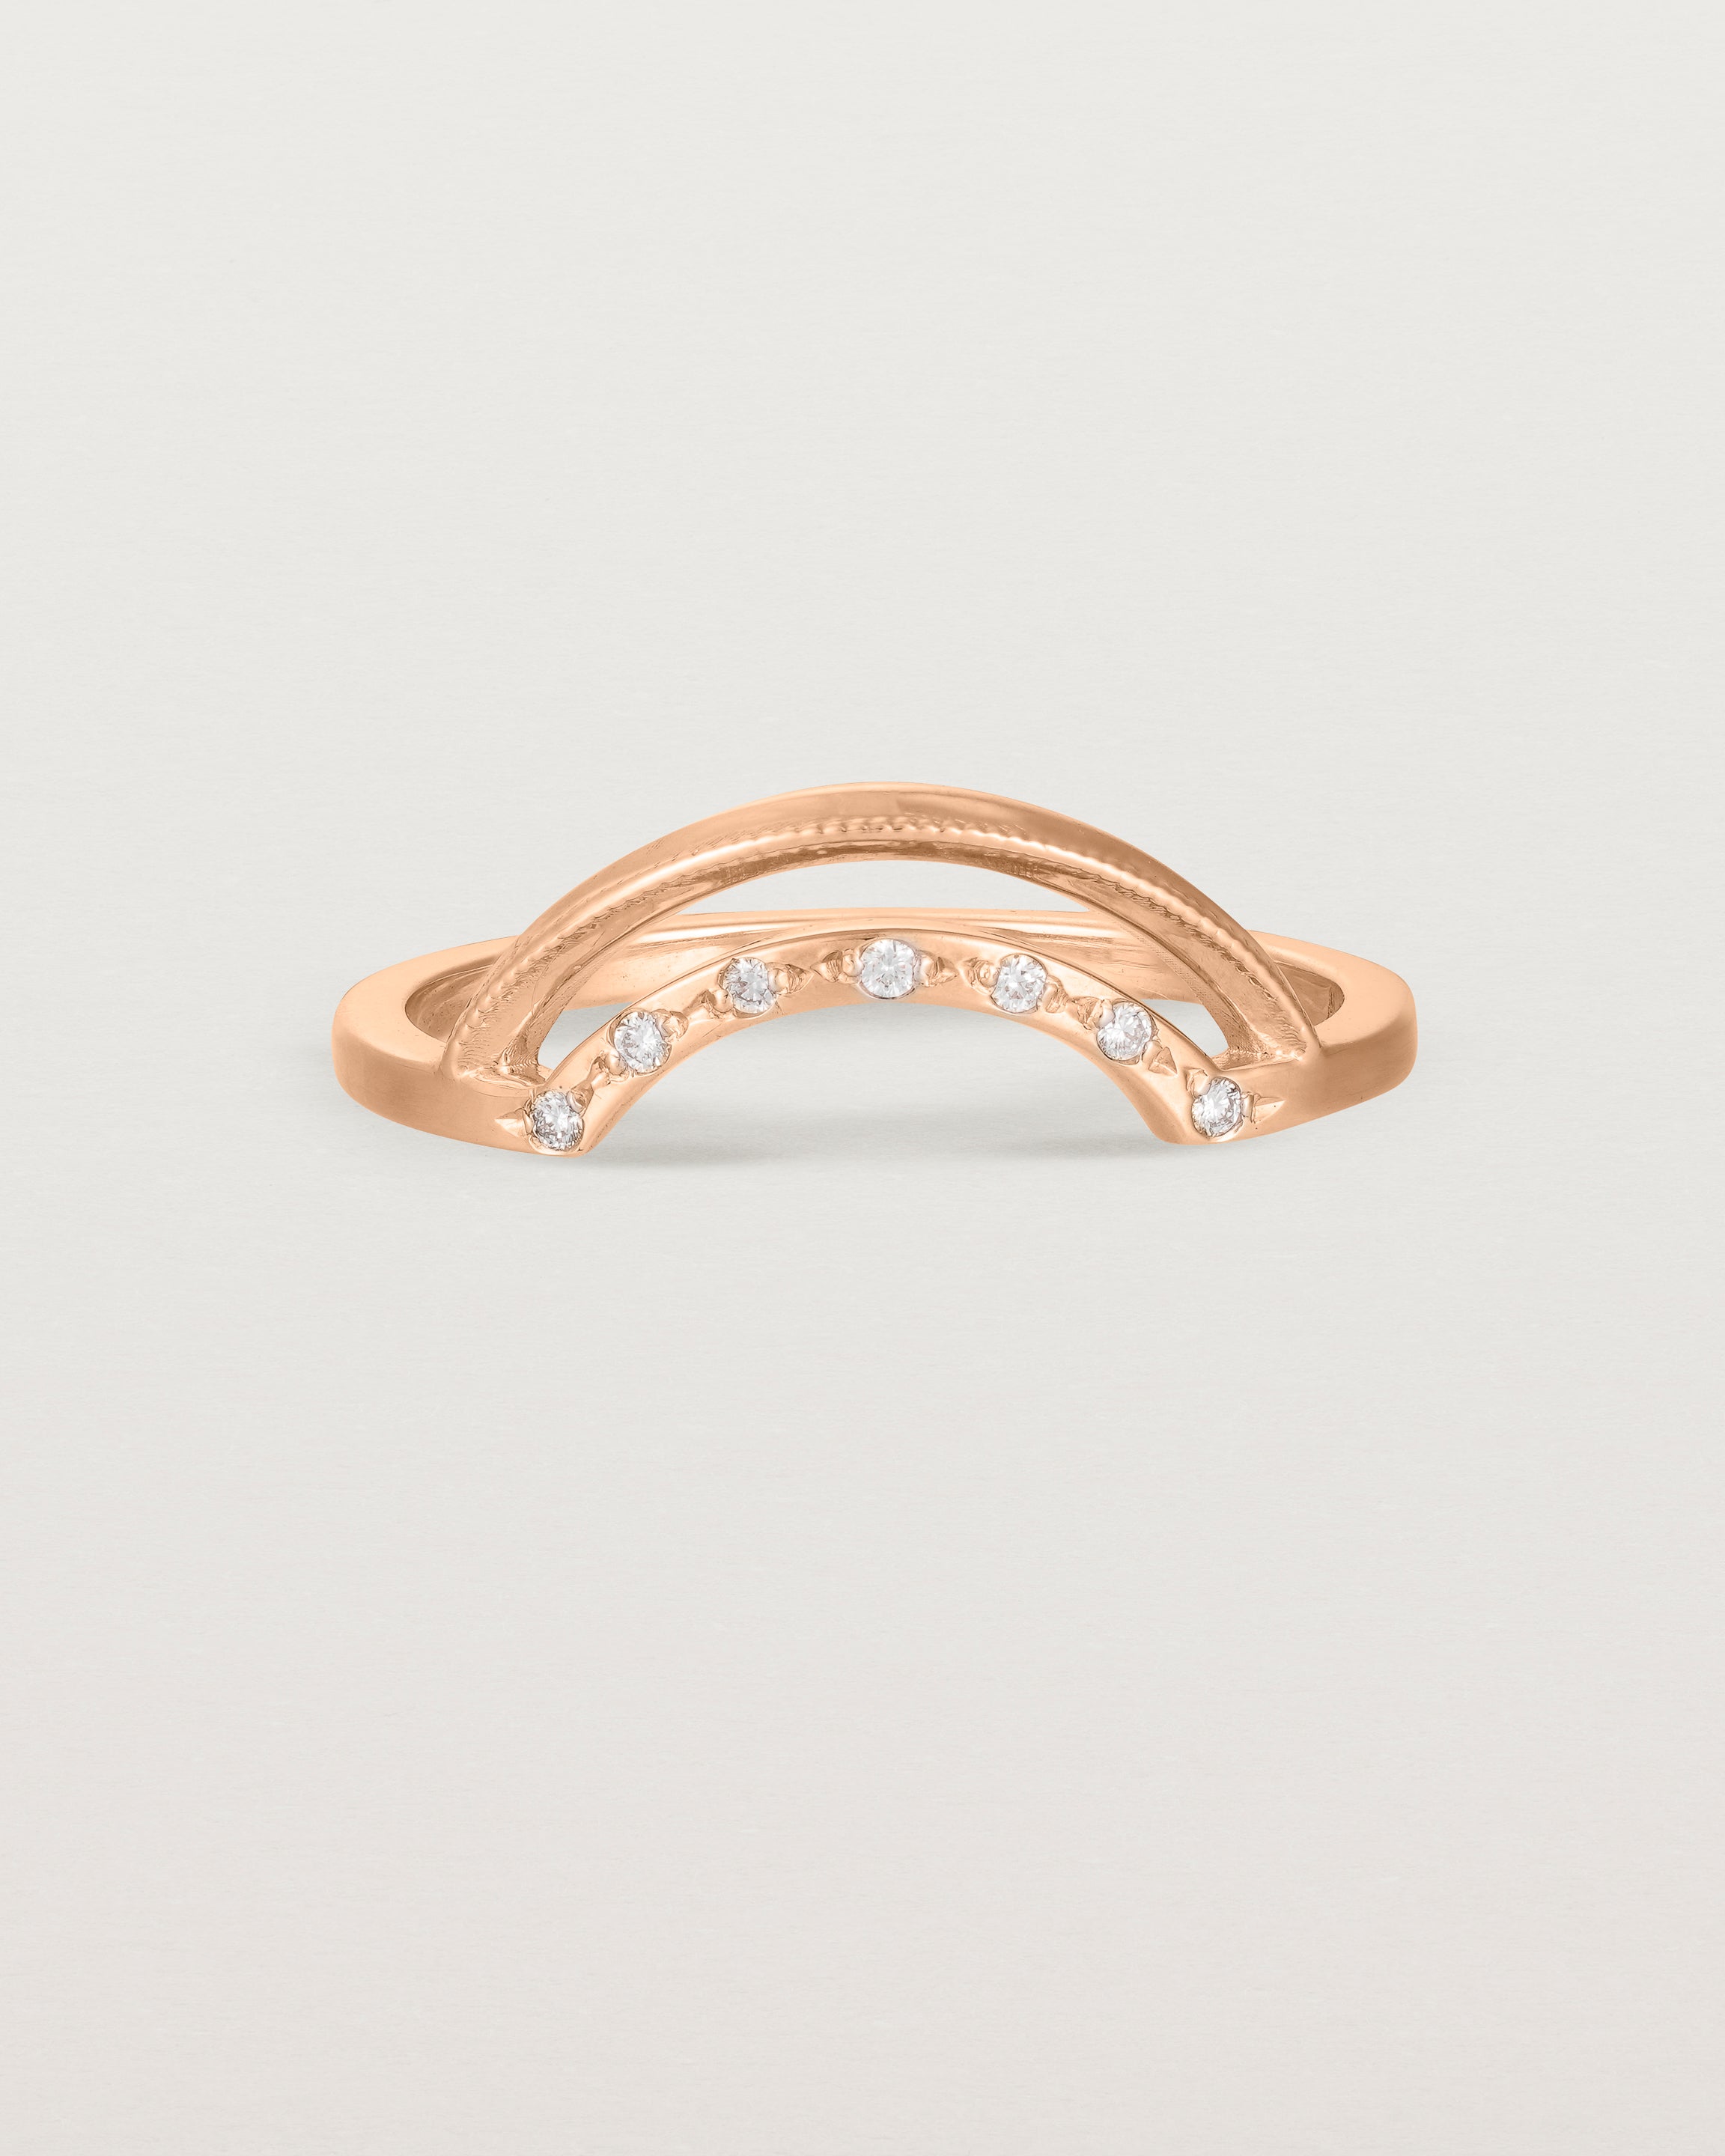 Fit three of a double arc crown ring with white diamonds adoring the inner arc - crafted in rose gold.